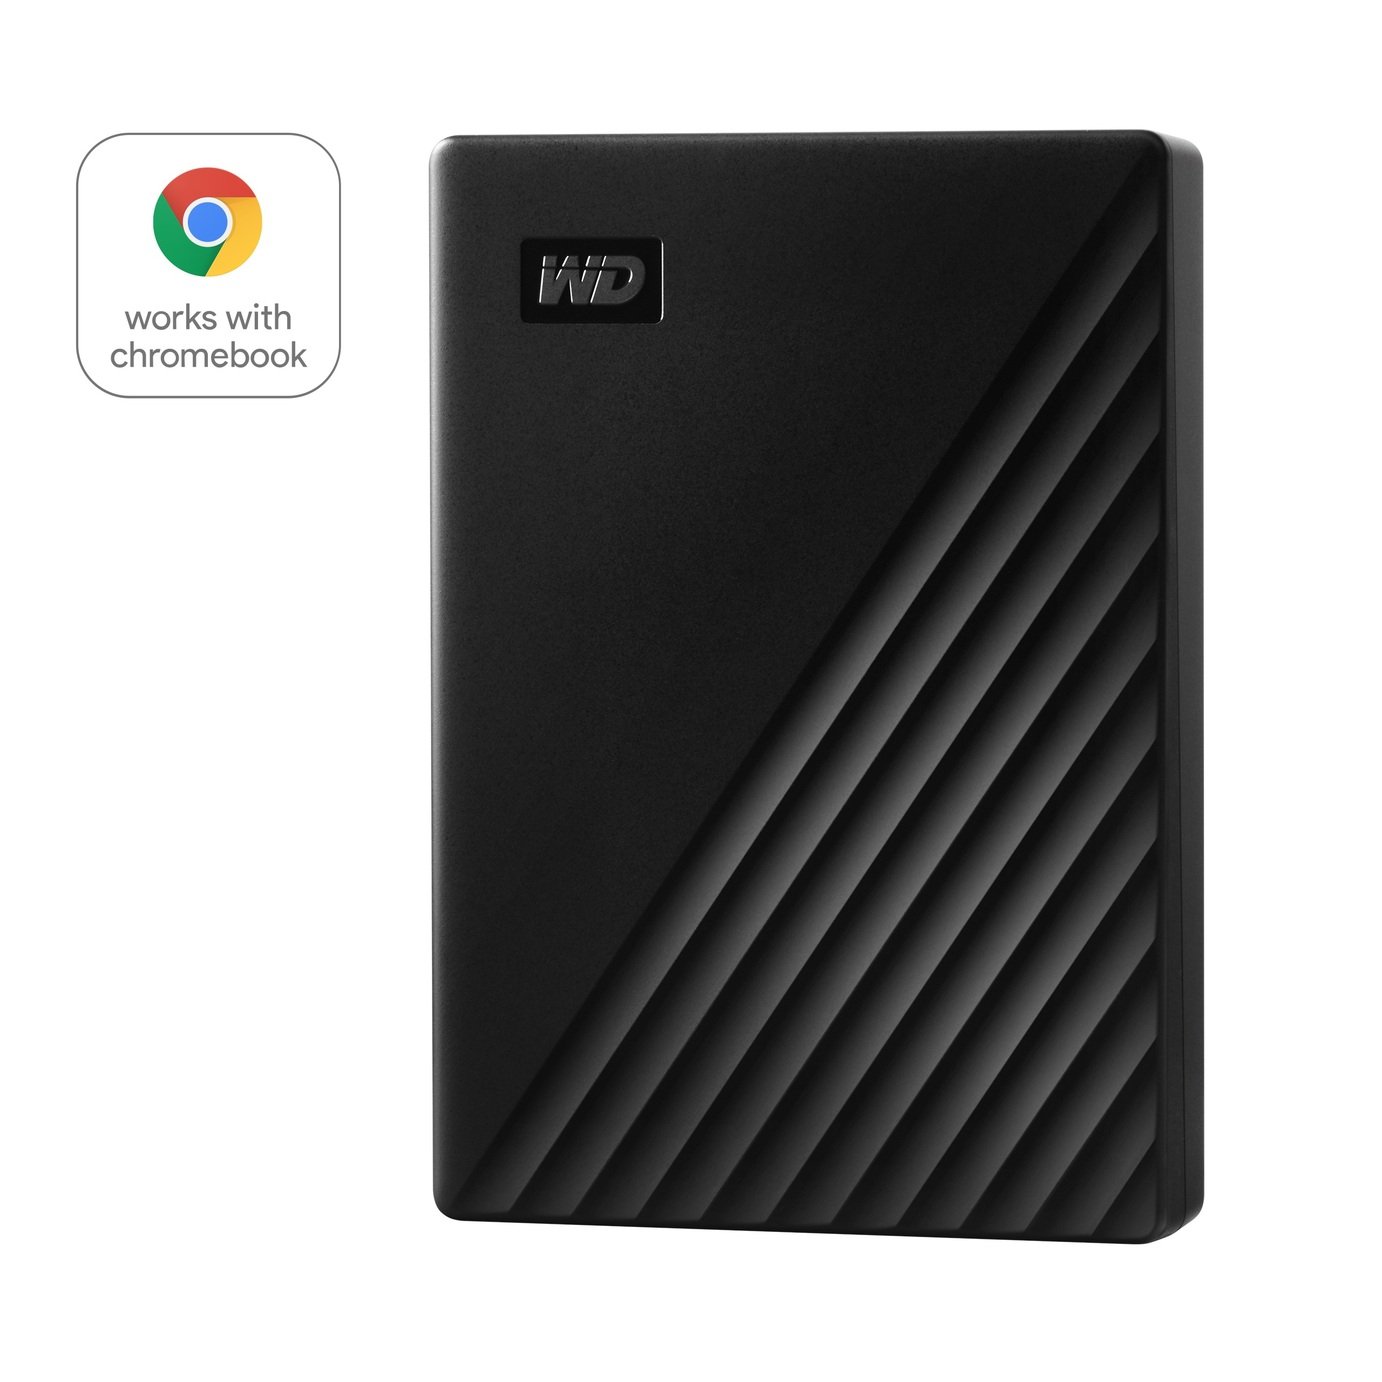 WD Passport 5TB Portable Hard Drive Review